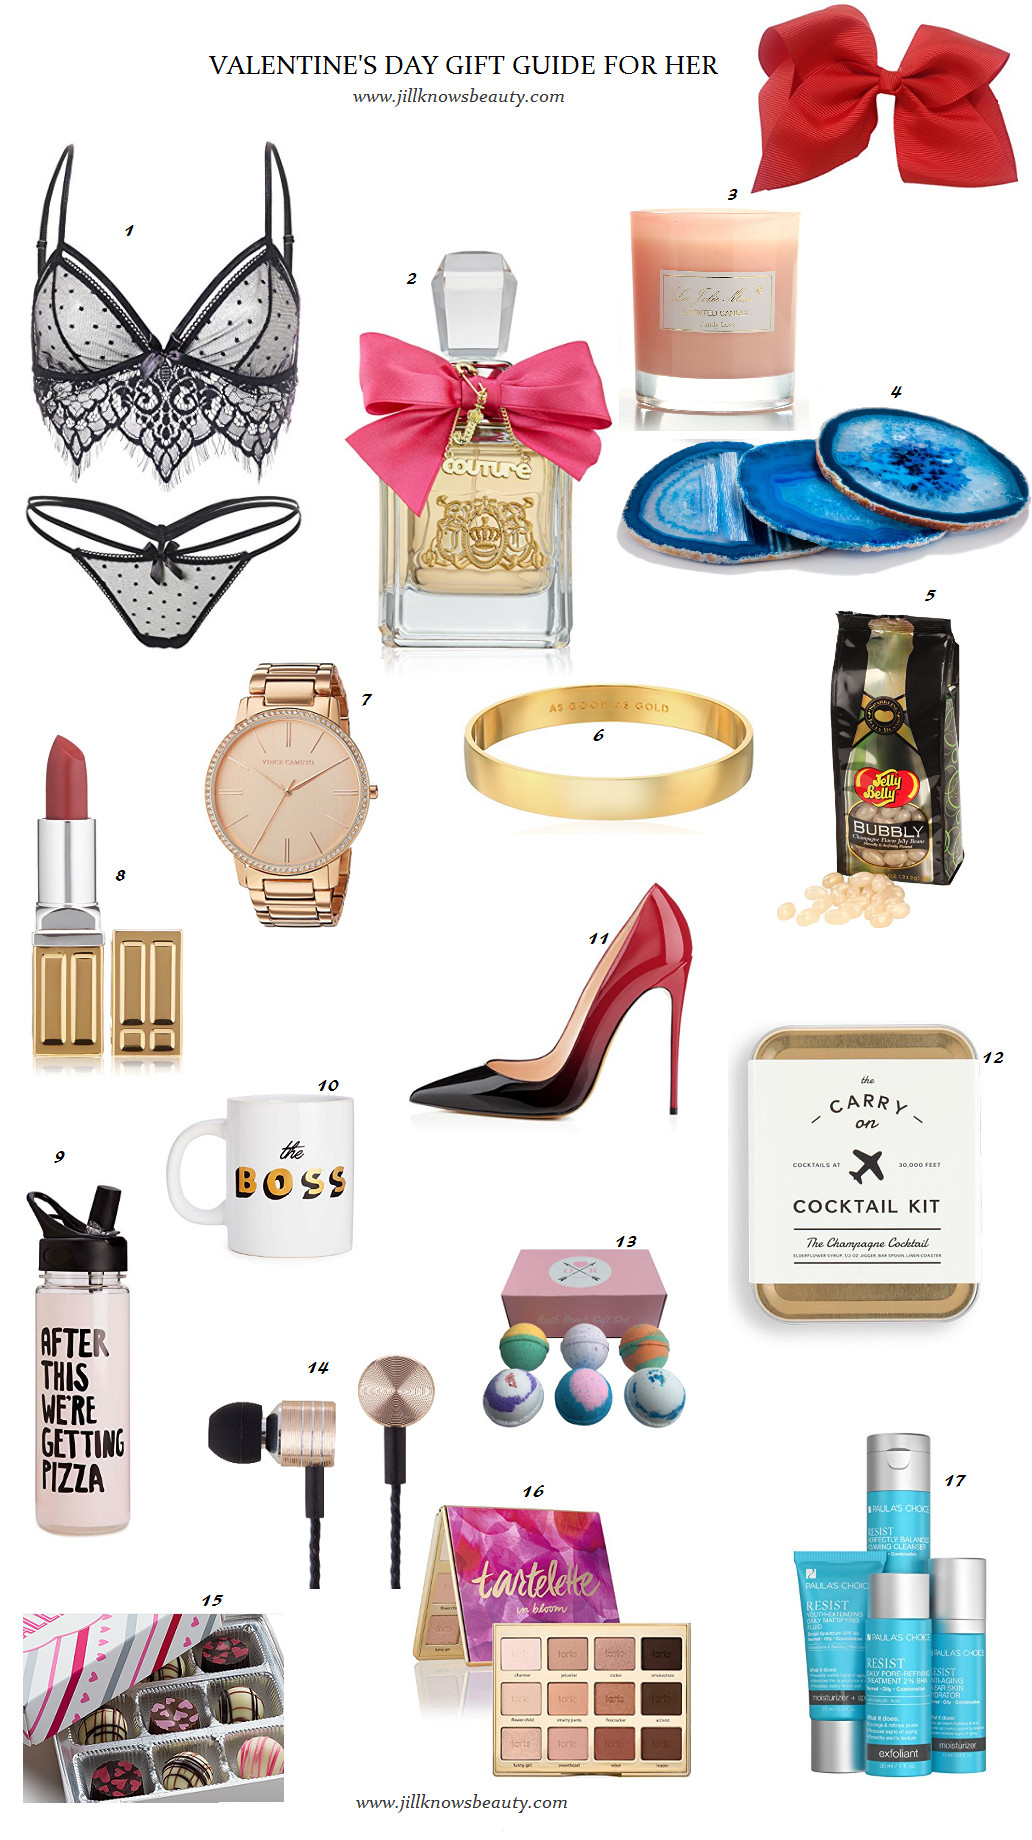 Valentines Day Gift Guide
 Valentines Day t guide fun ideas for that special